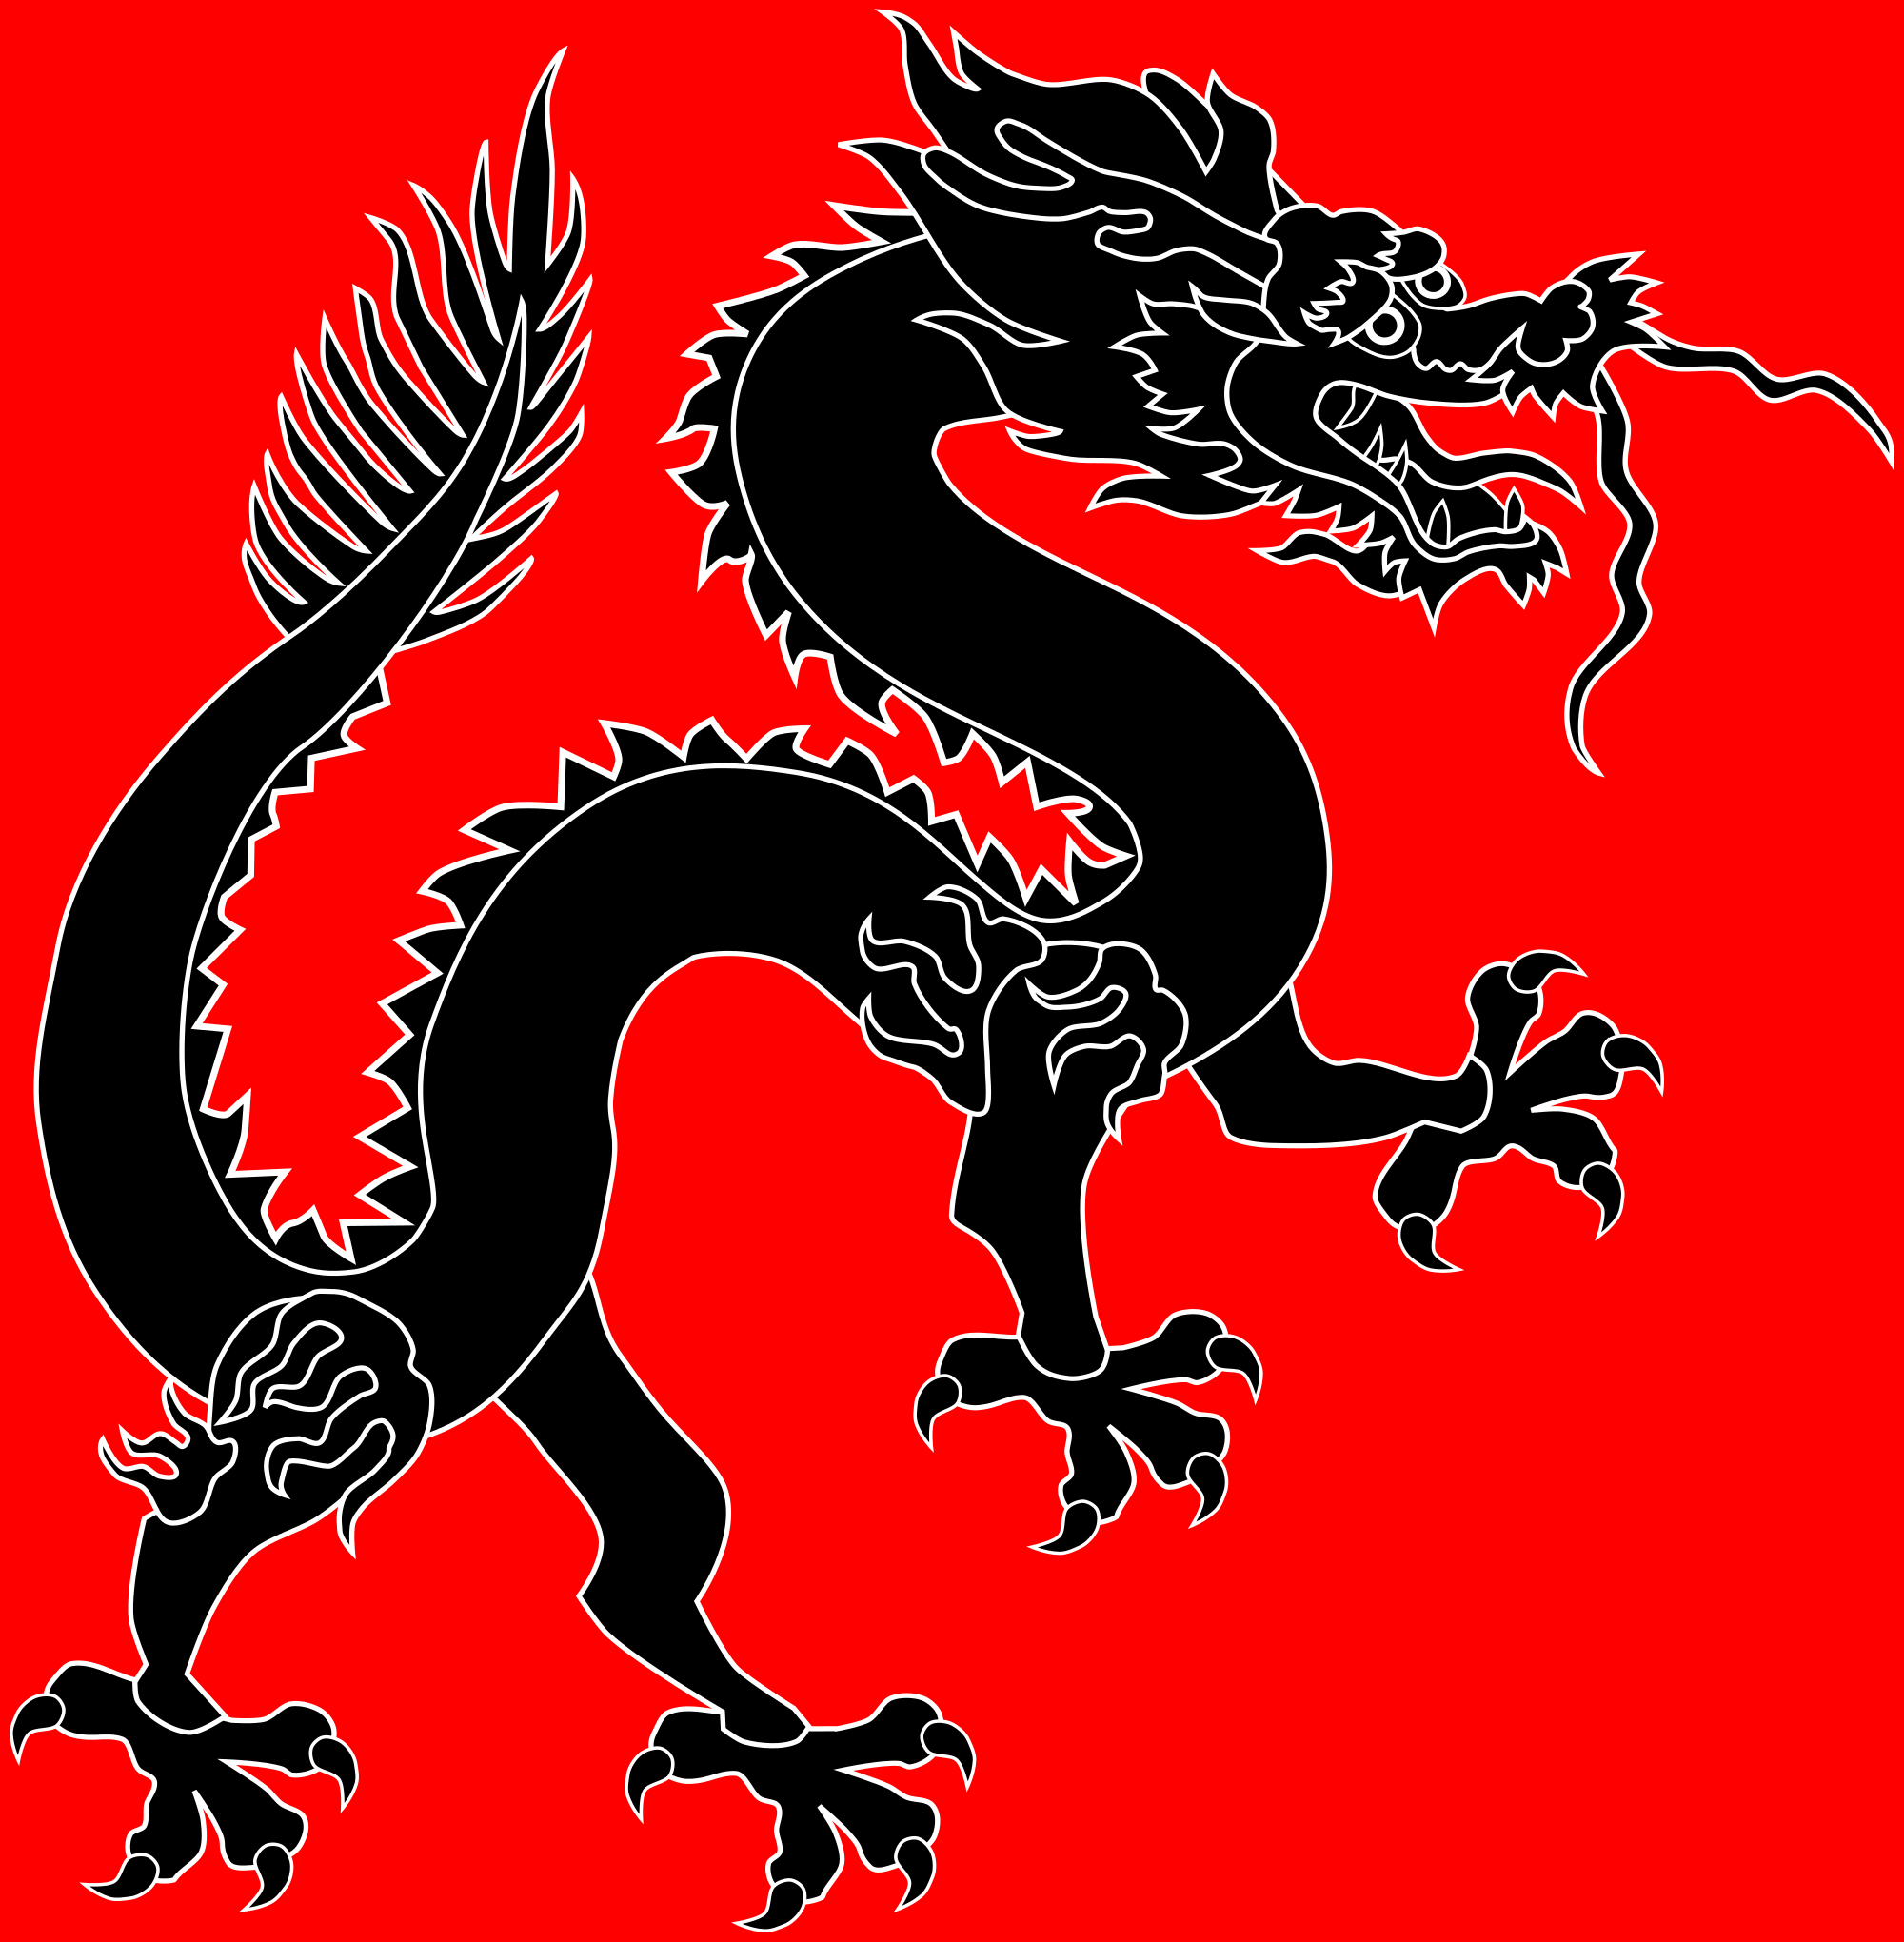 Red and Black Dragon Logo - File:Chinese black dragon red background.svg - Wikimedia Commons